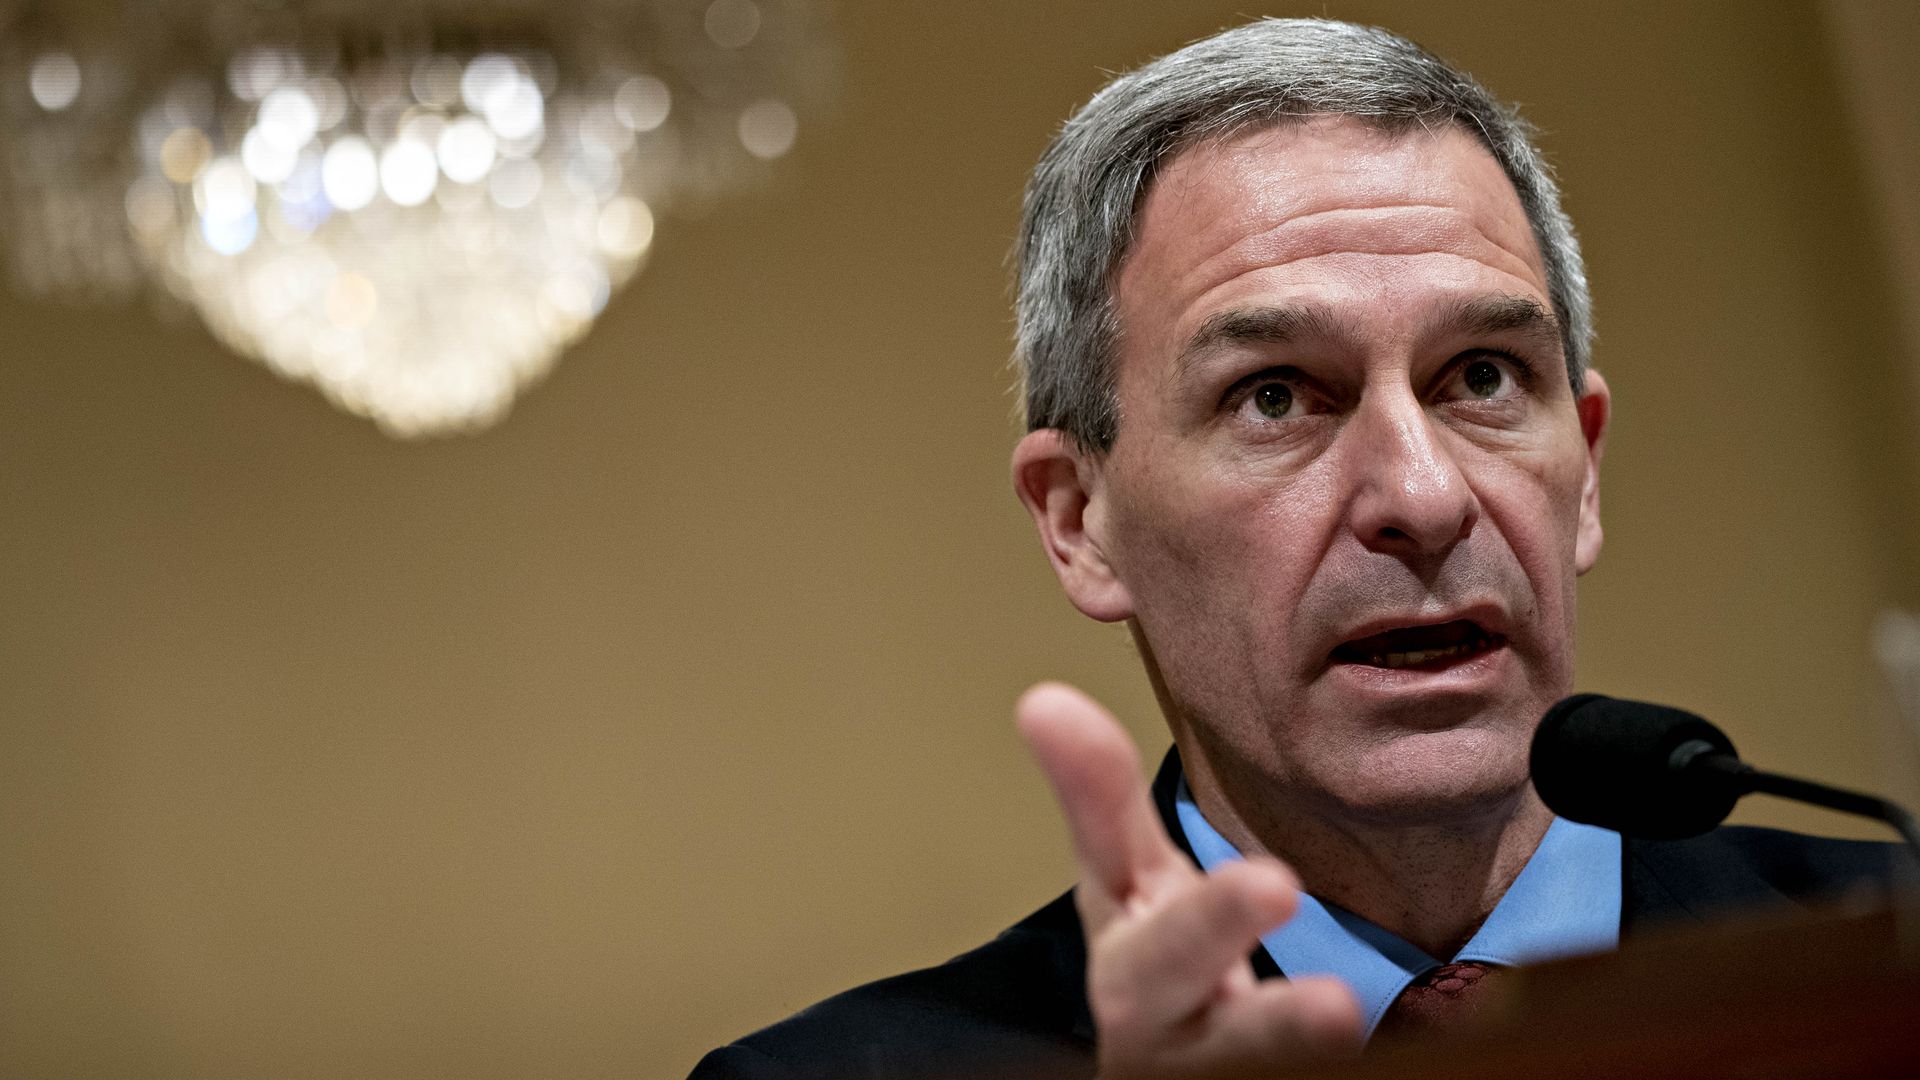 Ken Cuccinelli speaks during a House Homeland Security Subcommittee hearing in Washington, D.C.